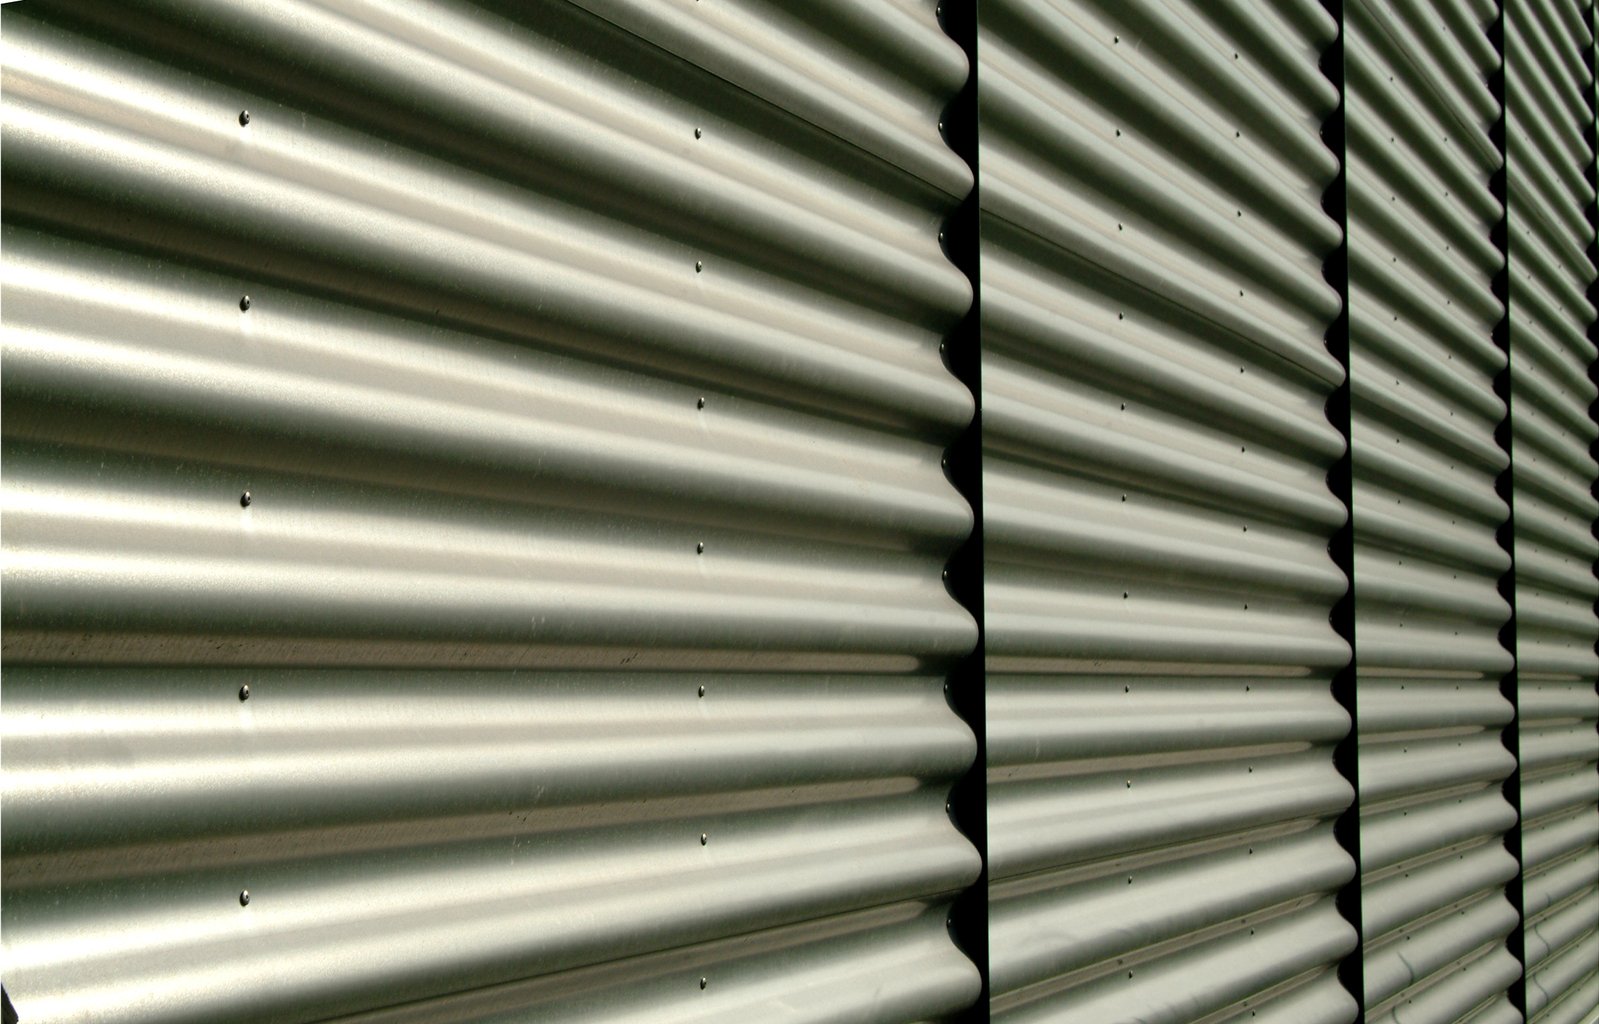 the background of a wall made from thin lines and horizontal ridges